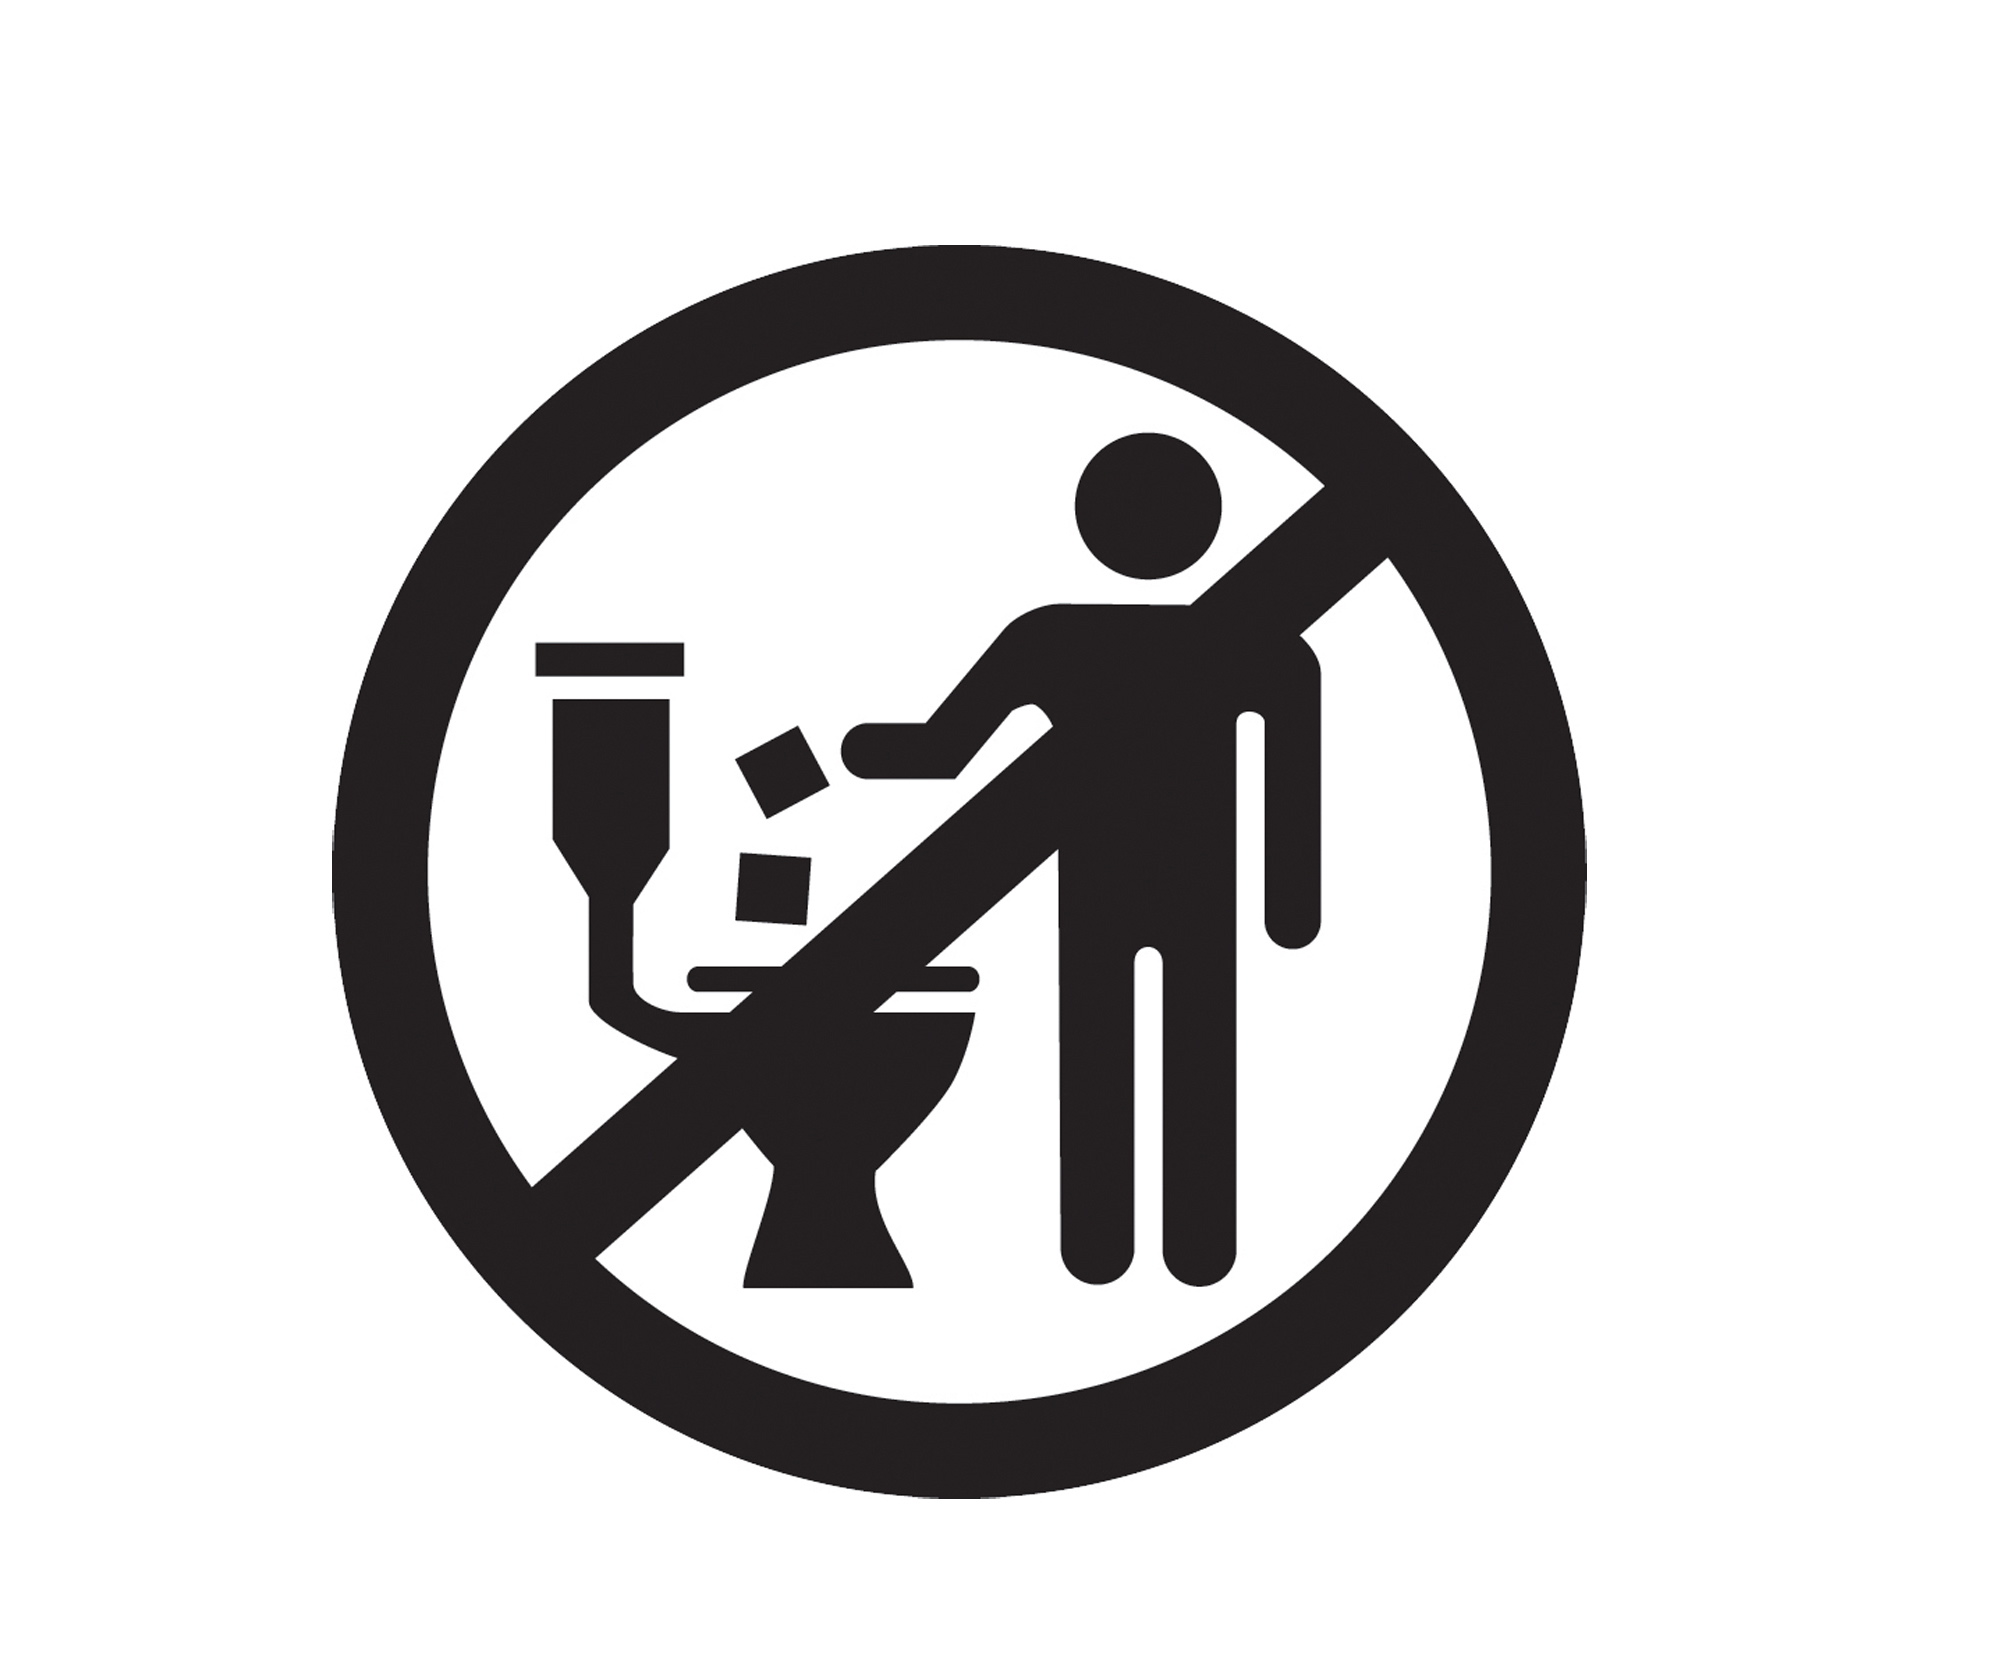 The universal stick-figure and do-not-flush symbol will be put on packaging of bathroom wipes that should not be flushed into sewer systems.